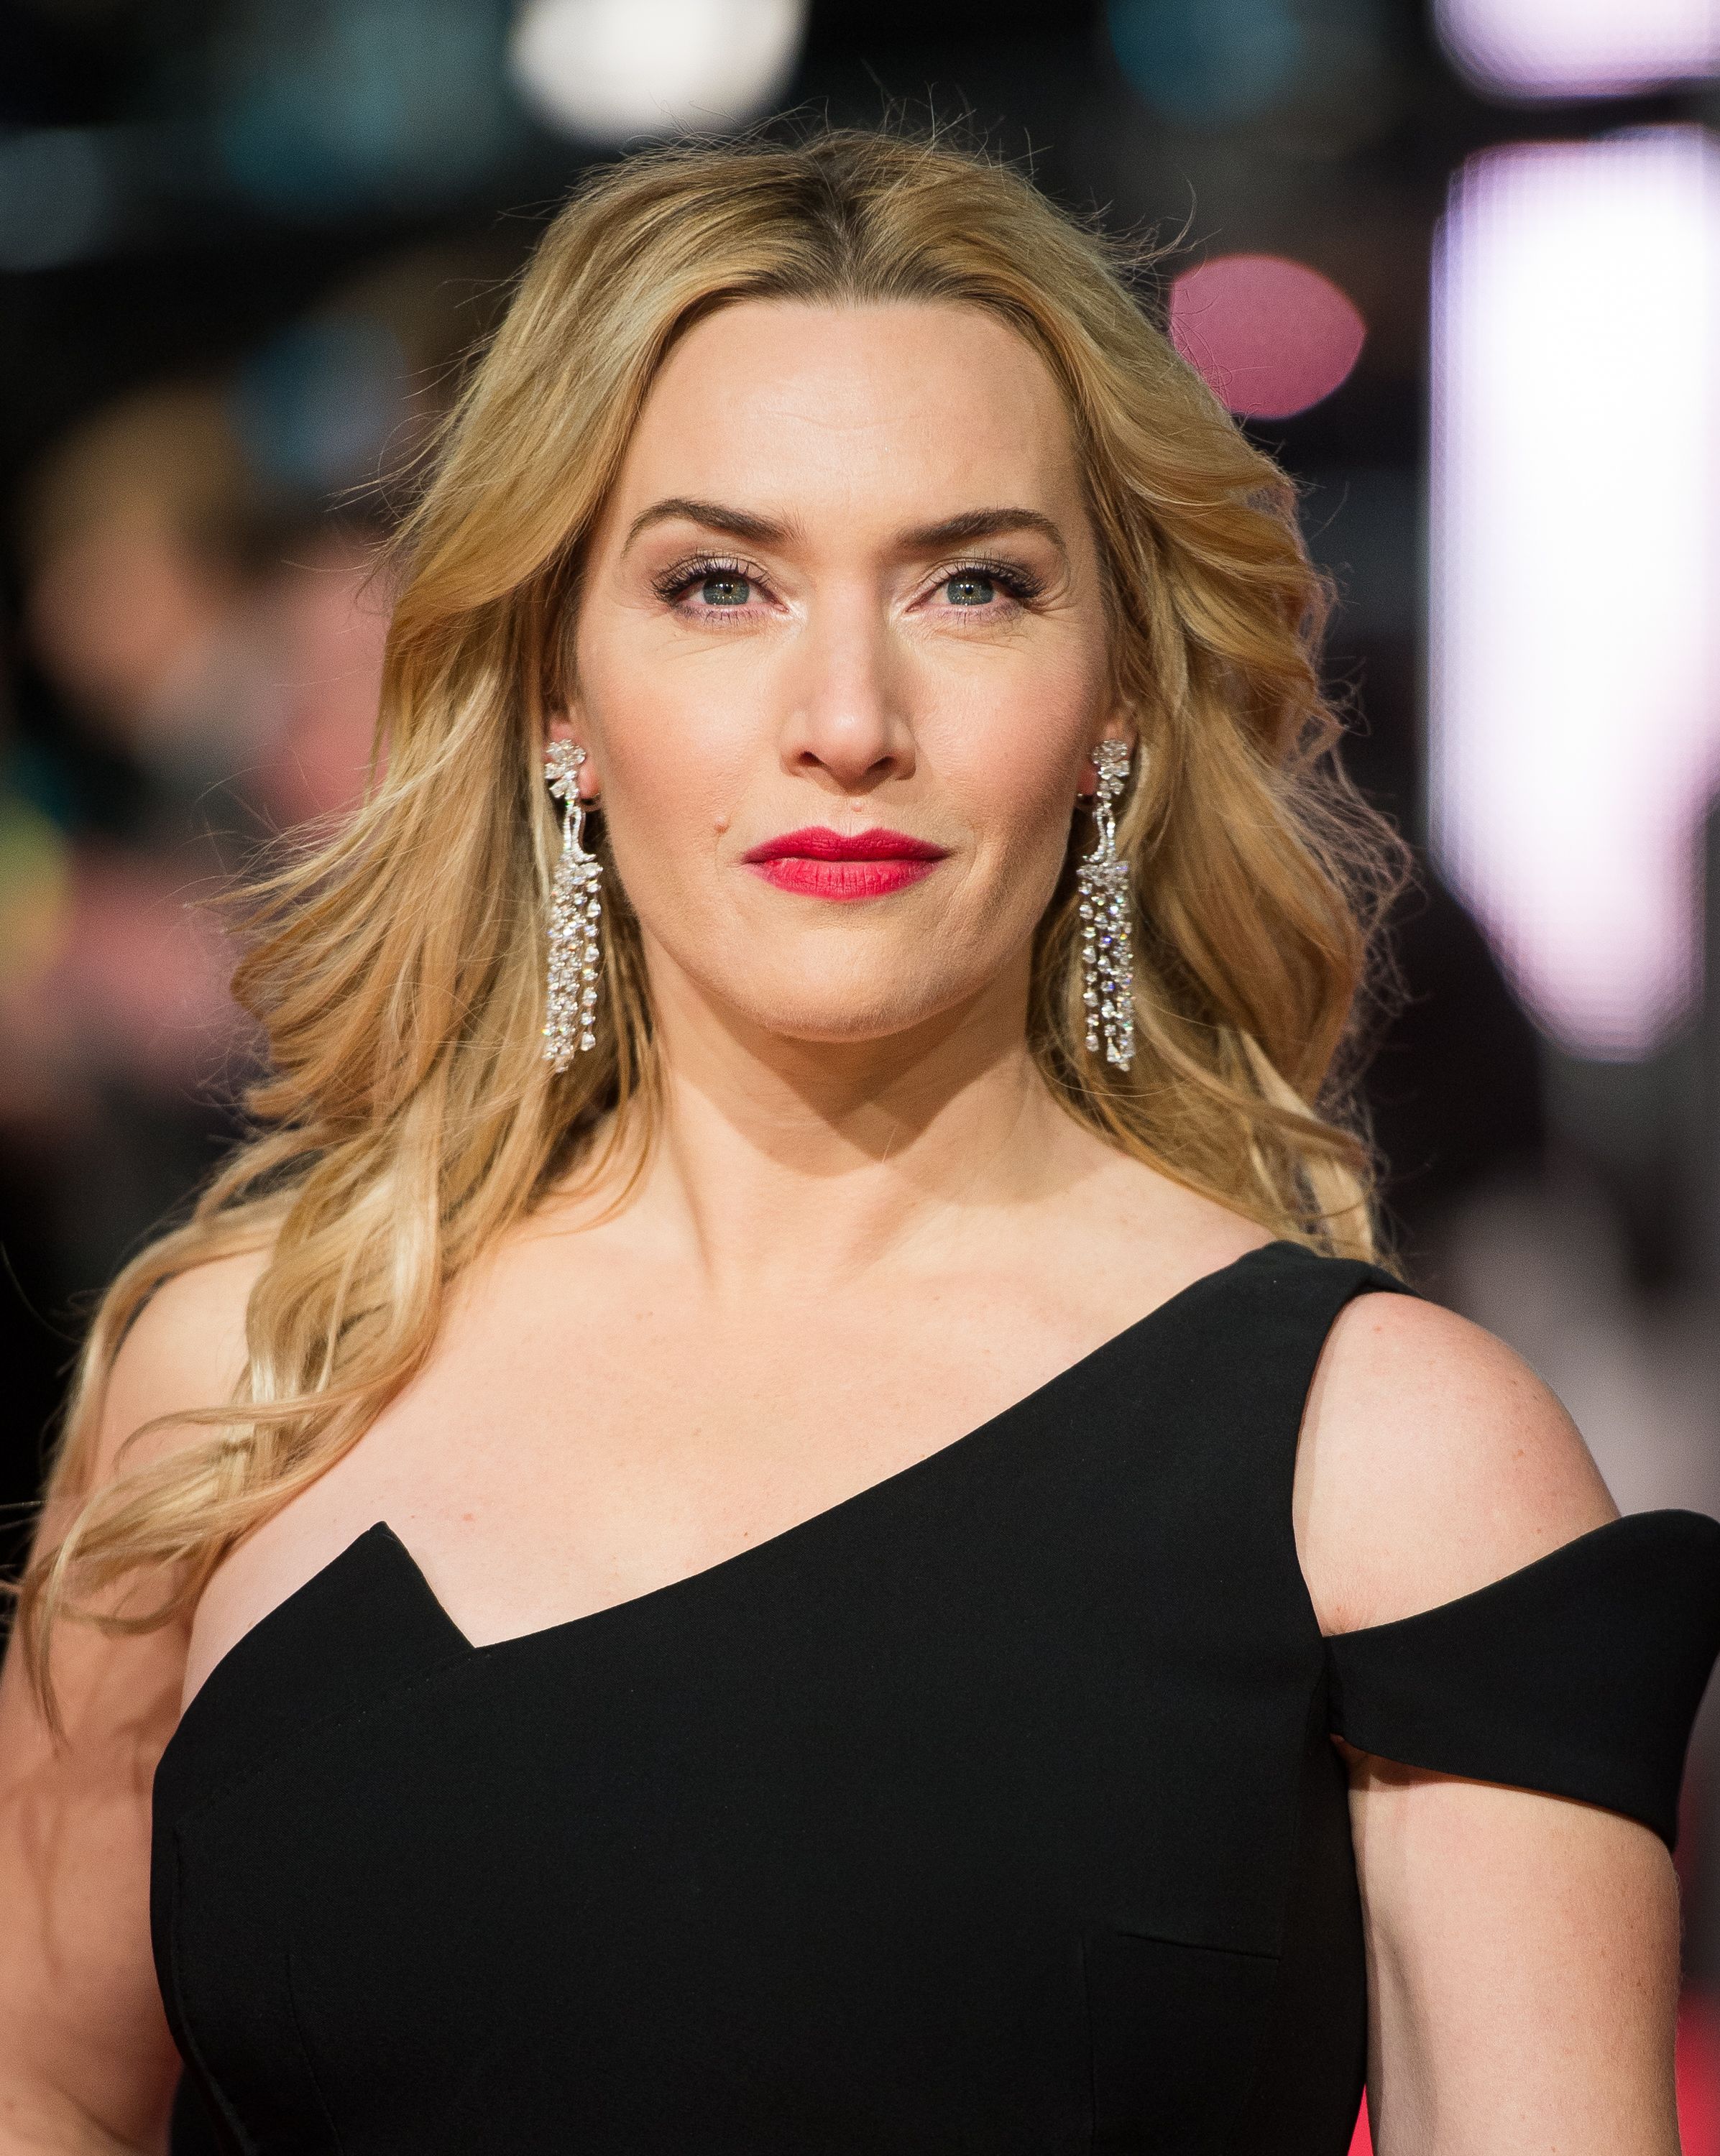 Kate Winslet Proves She Hasn’t Aged A Day After Recreating Her Iconic Iris Simpkins Curls